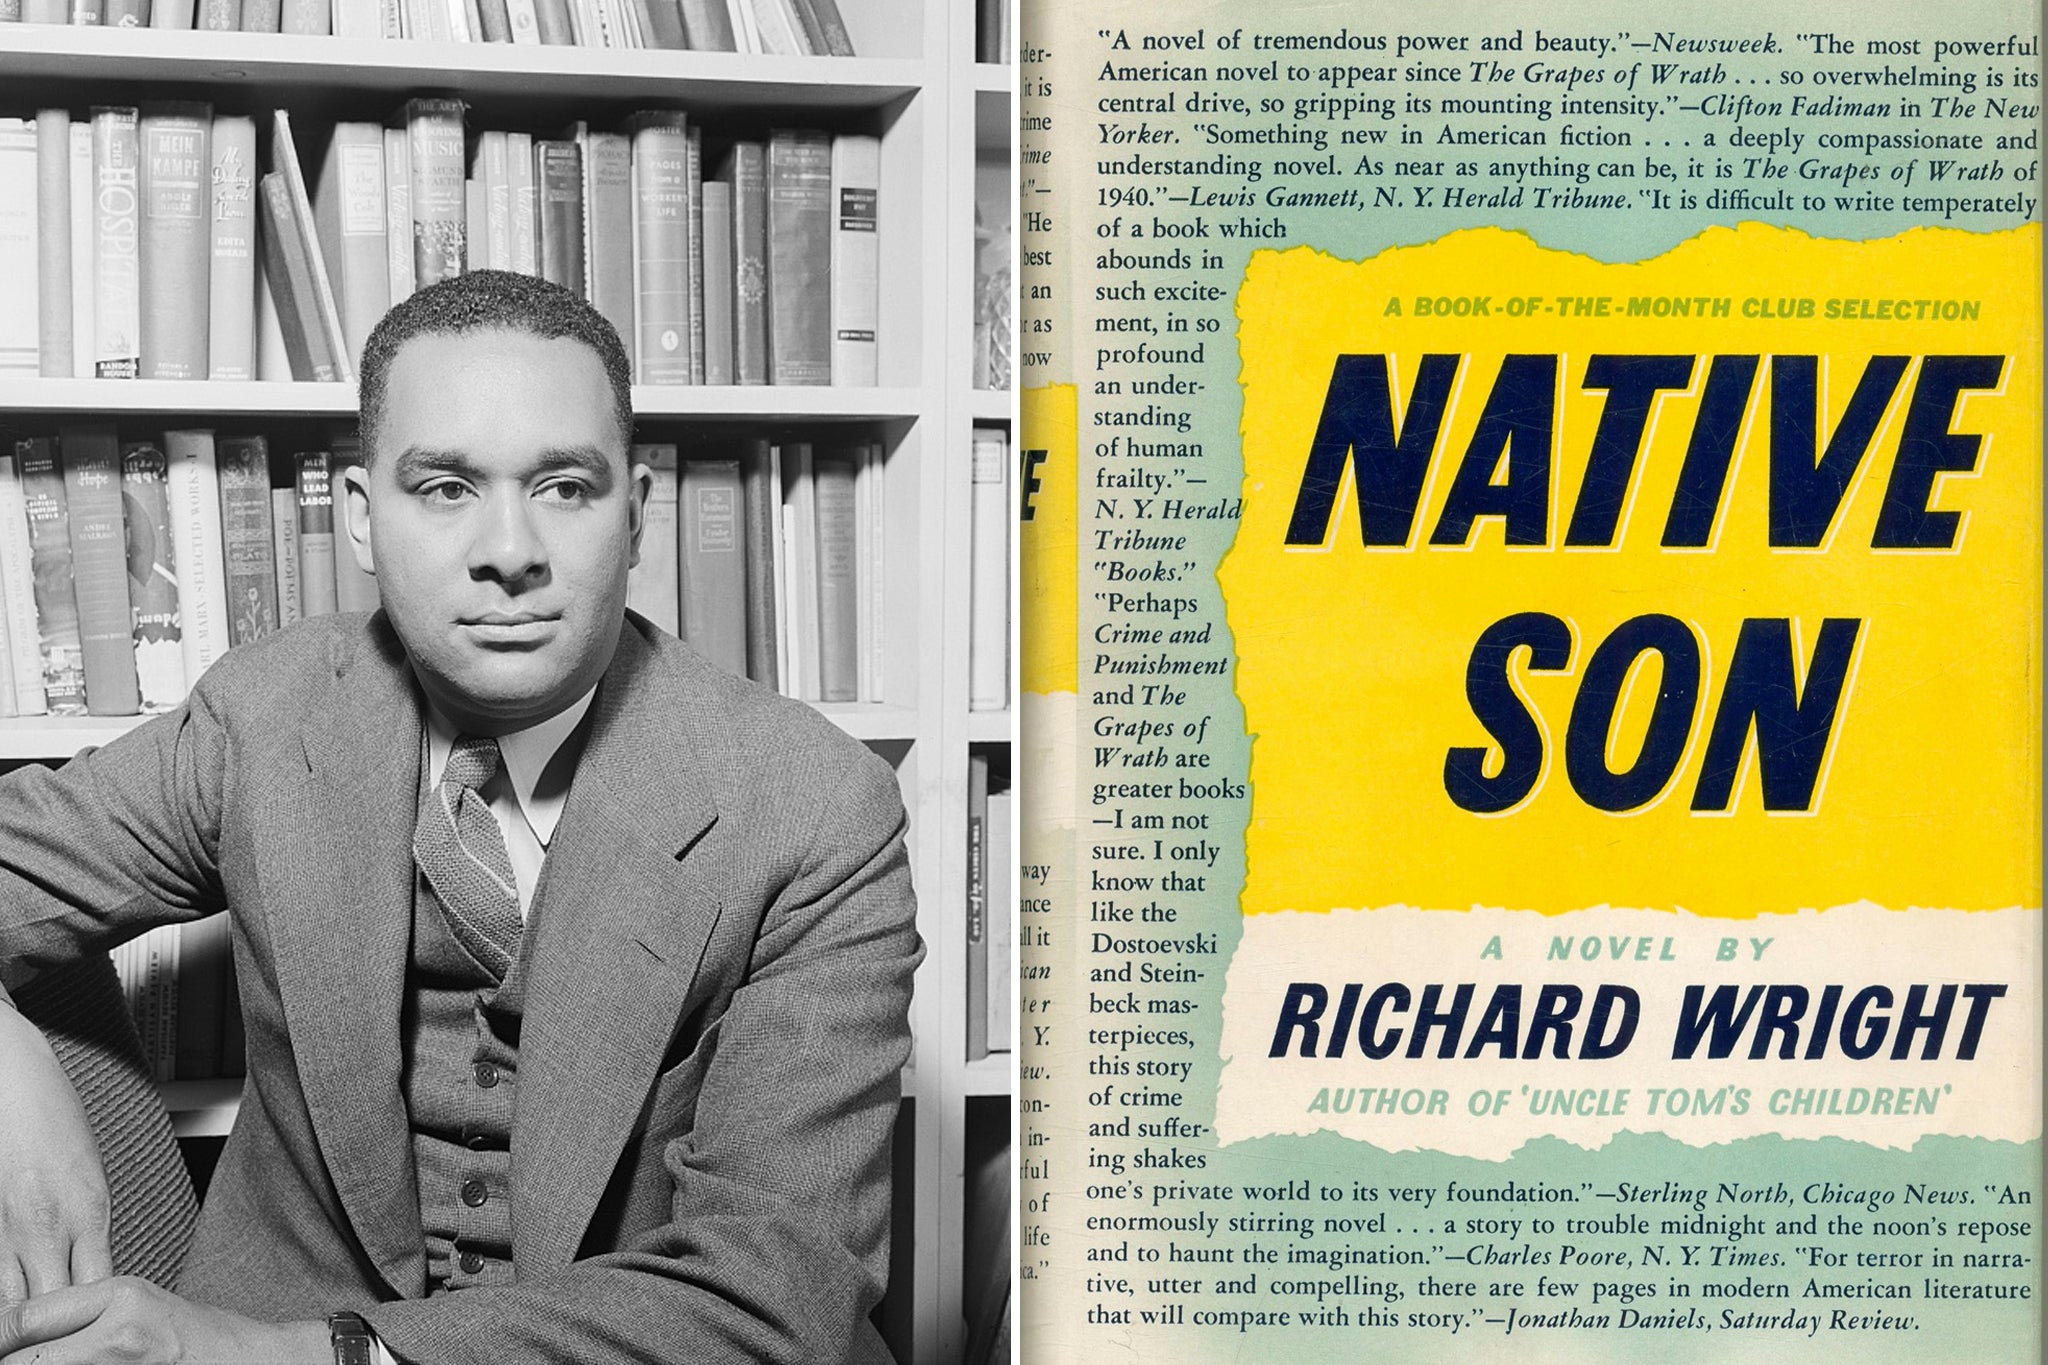 Although Wright went on to write many books, his first novel, ‘Native Son’, is his most famous